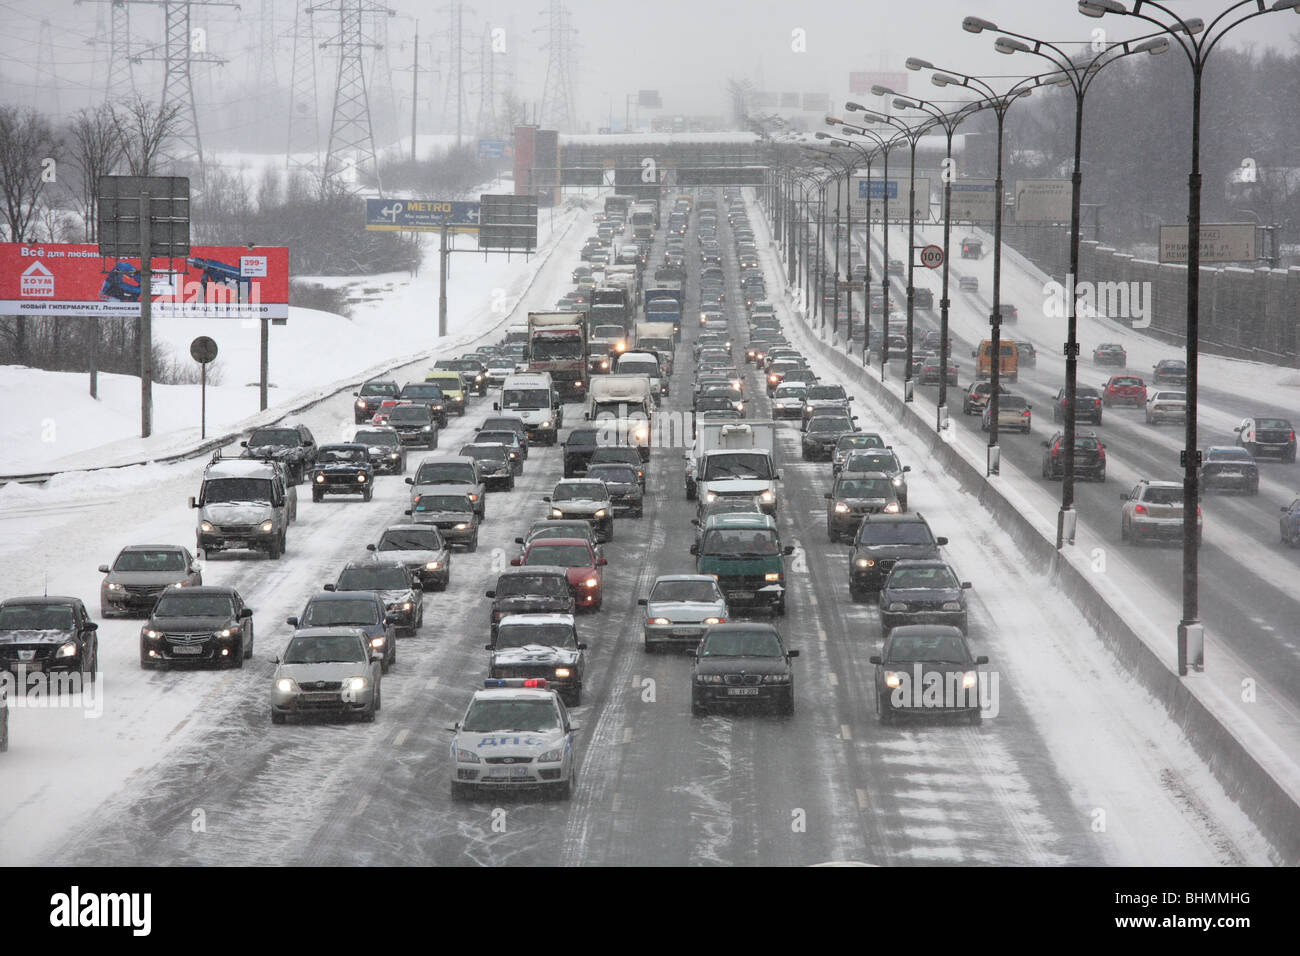 A snowstorm slows traffic on MKAD, Moscow, Russia. Stock Photo